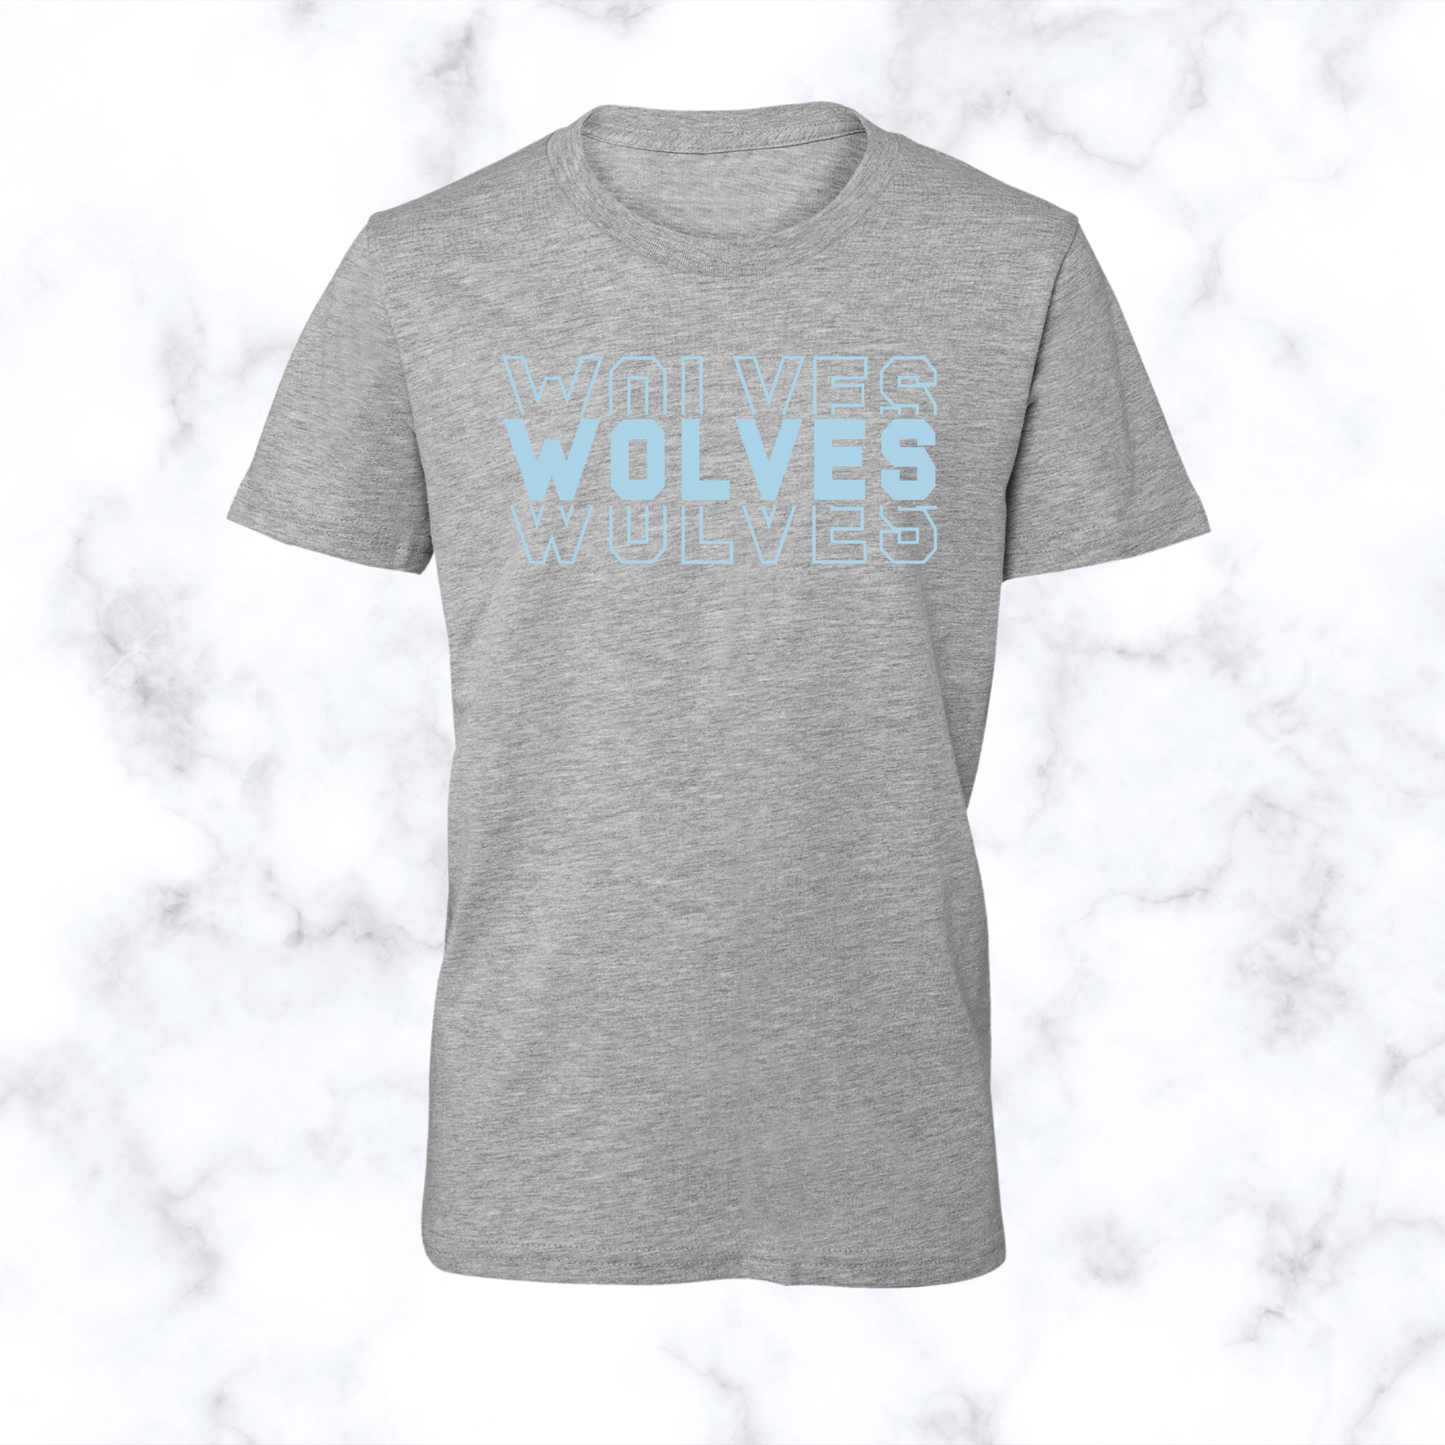 Wolves Stacked Tee Adult